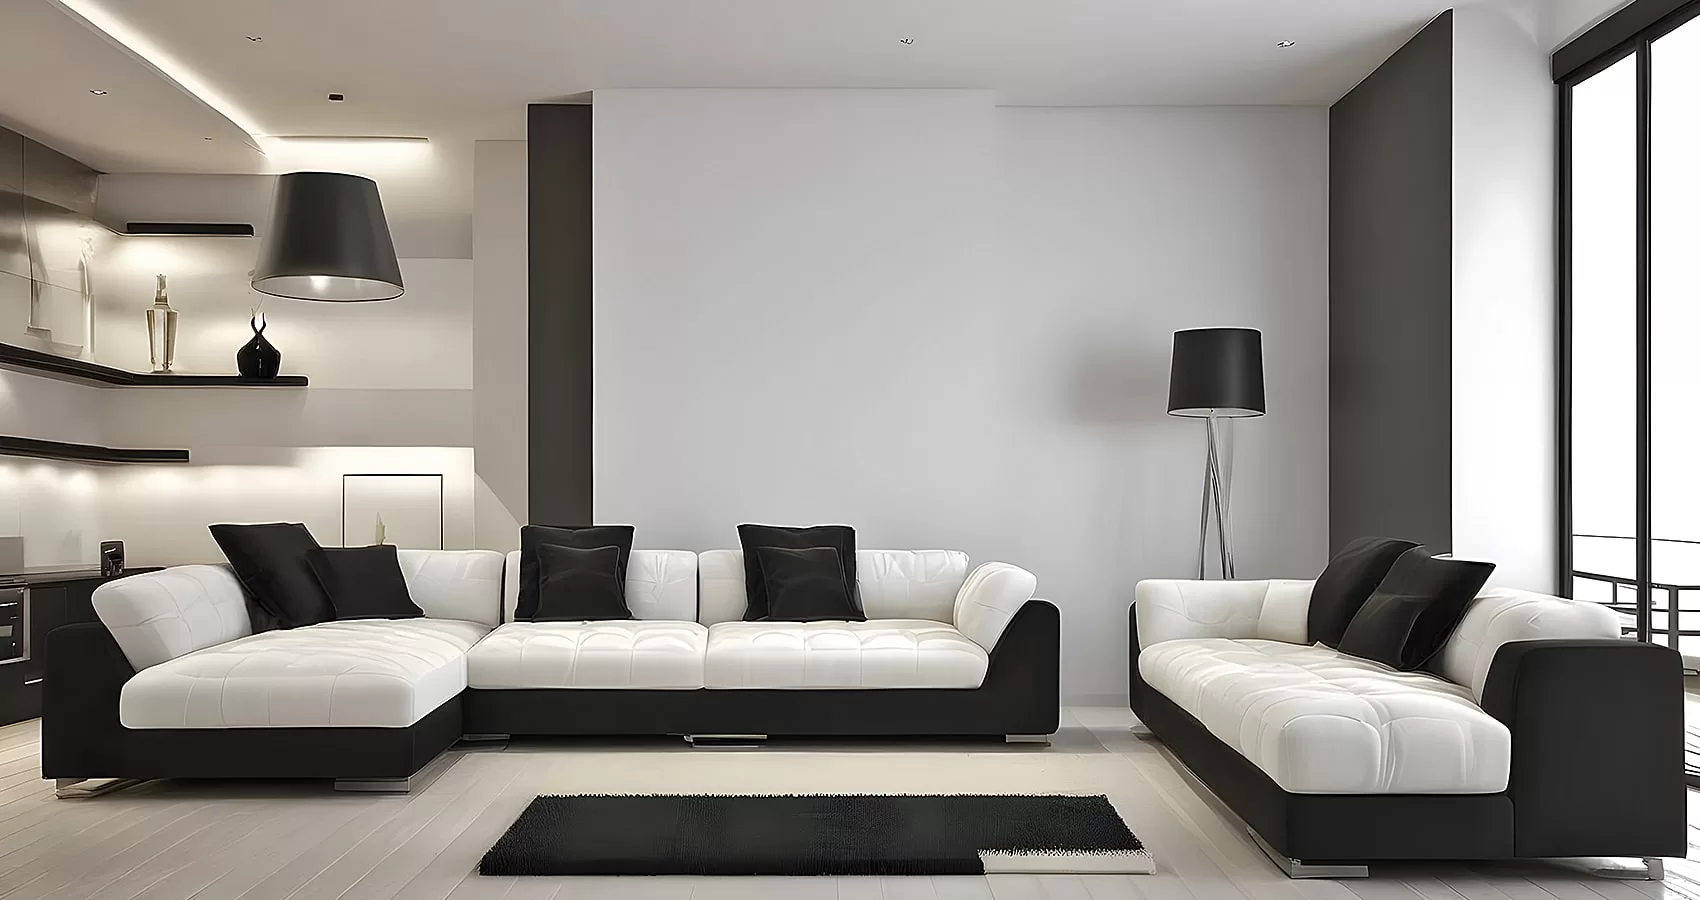 White and Black Couch | White and Black Sofa | Black and White Sofa | Black and White Couch